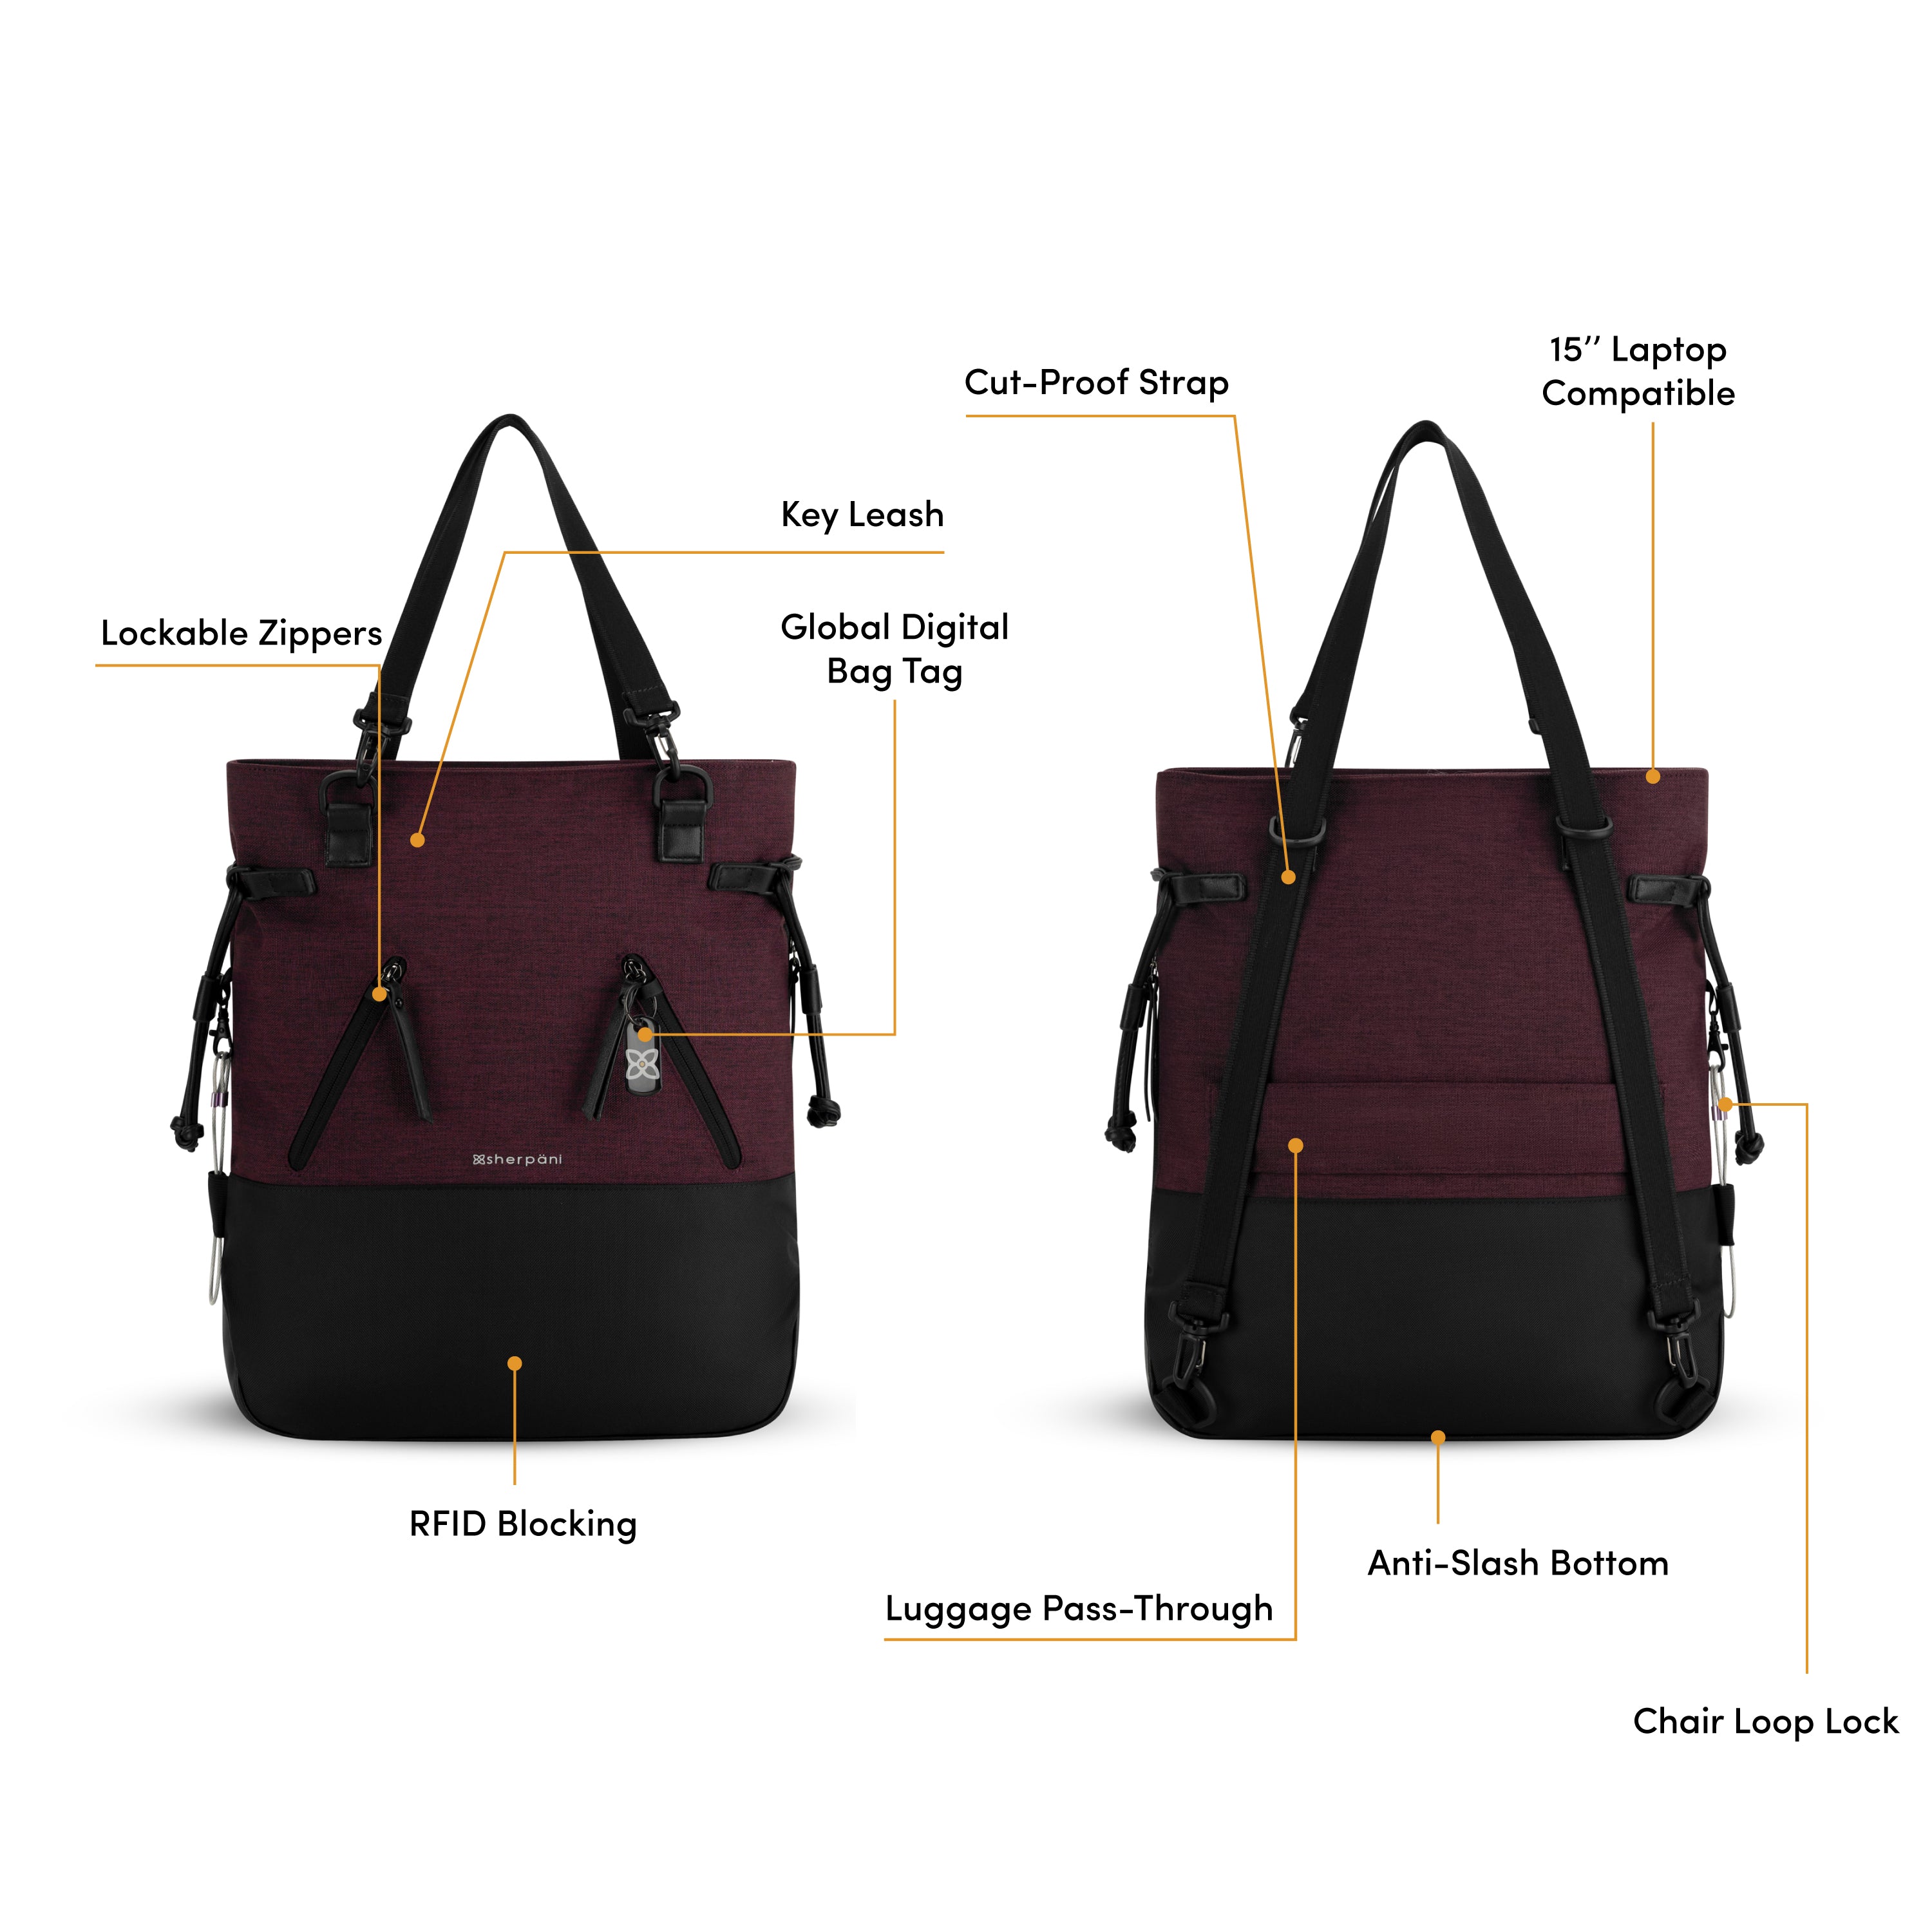 Graphic showing a side-by-side of the front and back of the Tempest. Black text points out the following bag features: Lockable Zippers, Key Leash, Global Digital Bag Tag, Cut-Proof Strap, 15" Laptop Compatible, Luggage Pass-Through, Anti-Slash Bottom, Chair Loop Lock. 